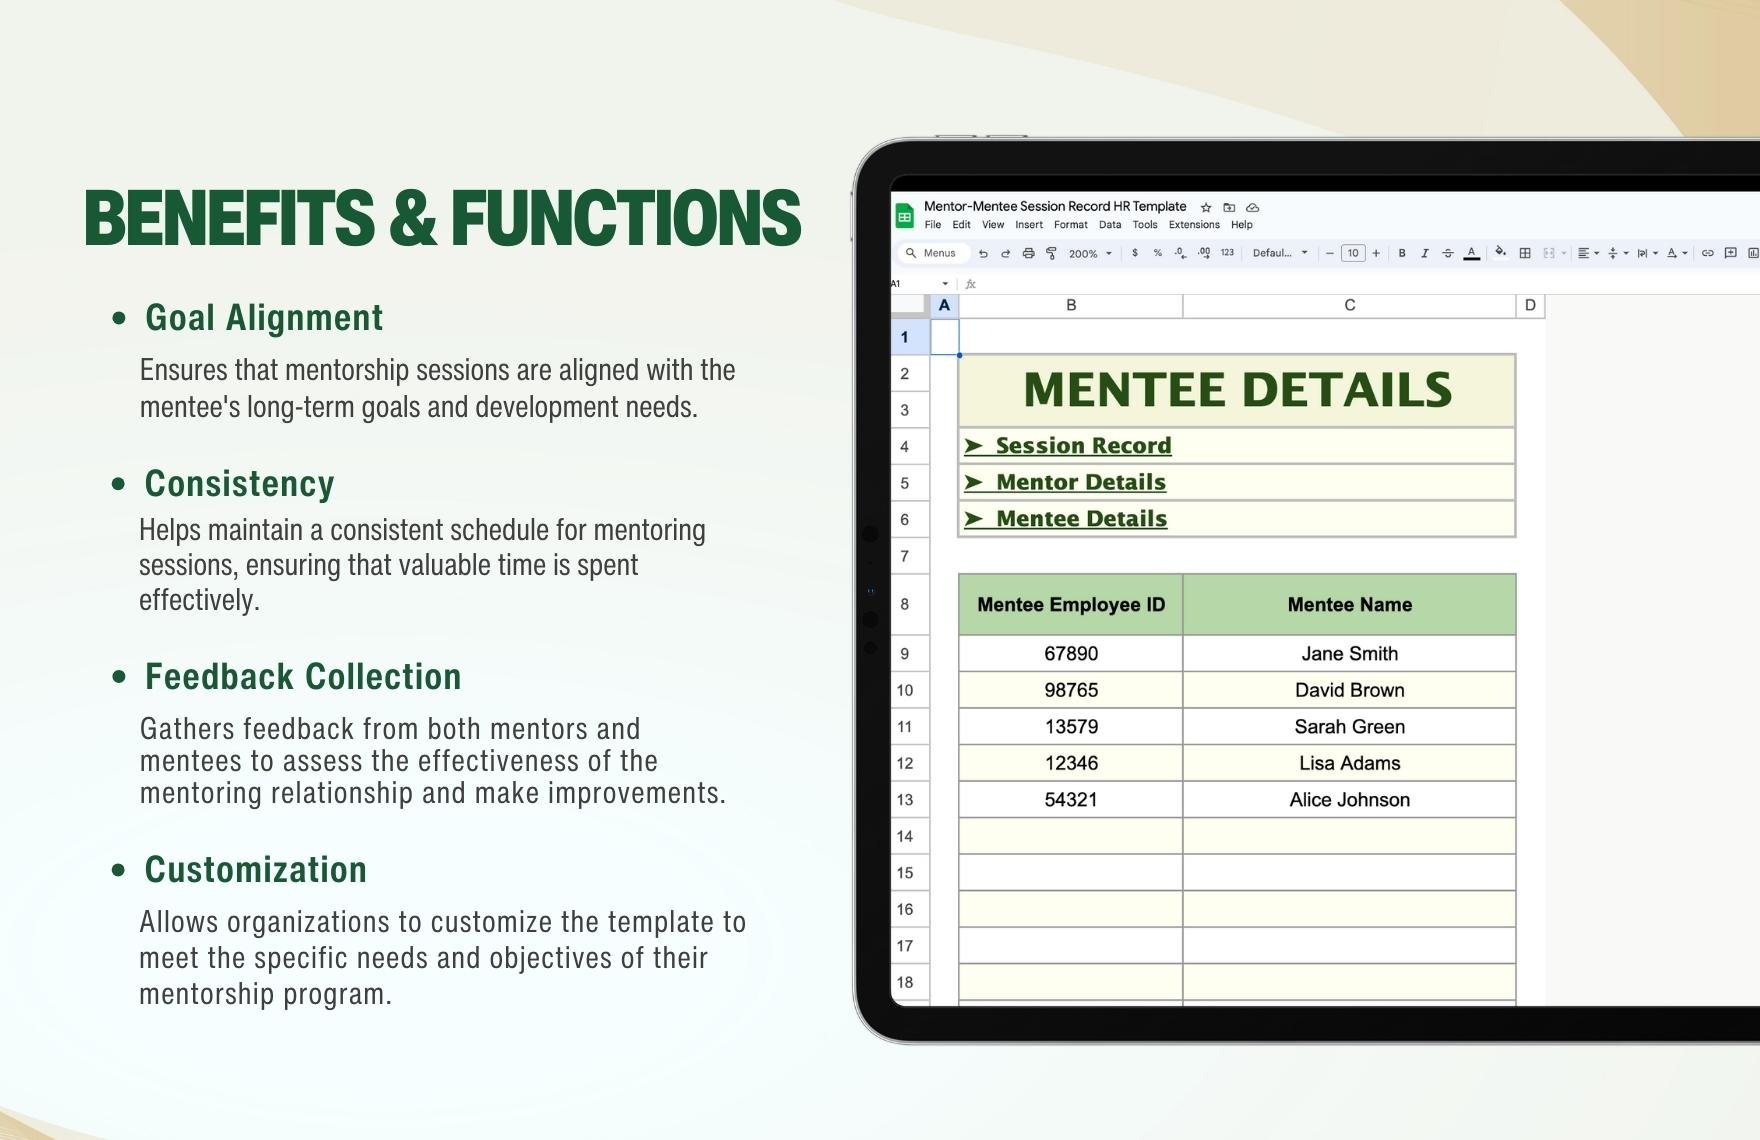 Mentor-Mentee Session Record HR Template